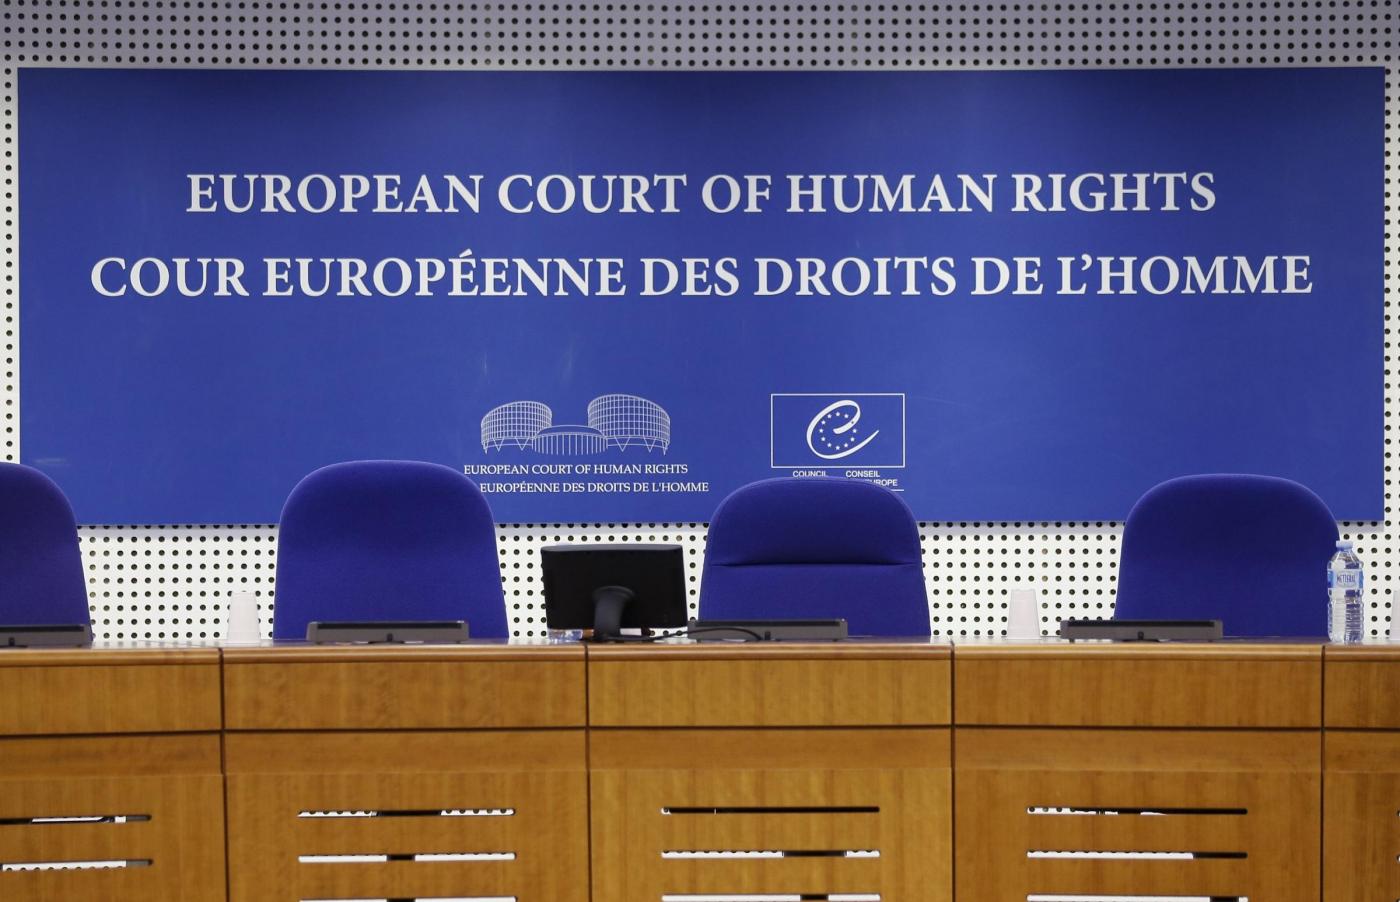 H.M. and Others v. Hungary: Confinement and treatment of pregnant woman and her family in Tompa transit zone violated their rights under Article 3 and Article 5